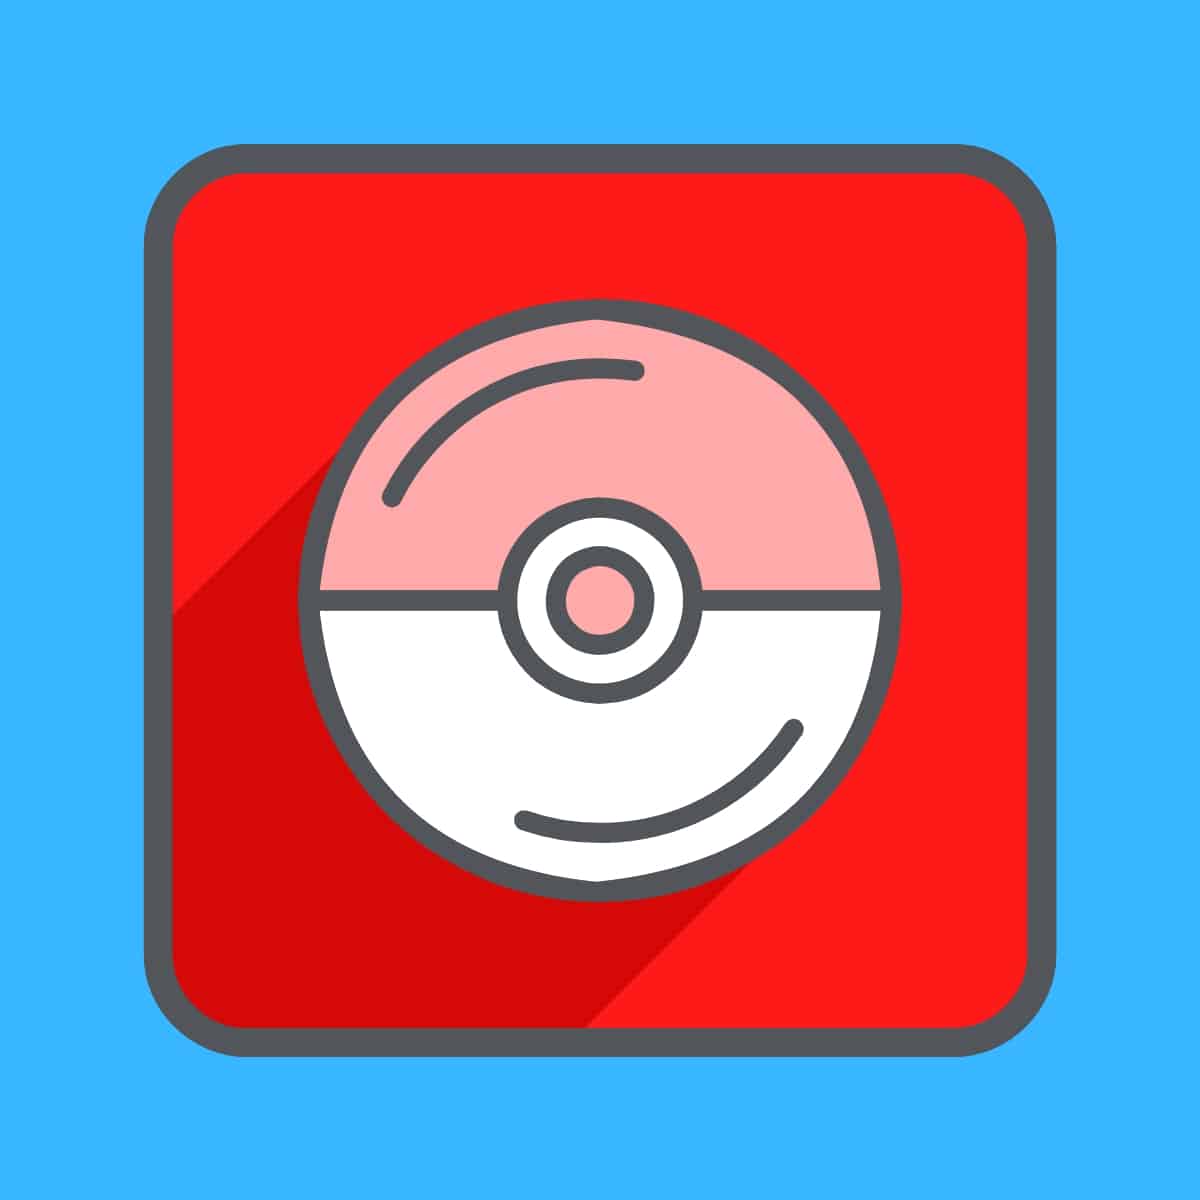 Cartoon graphic of a red and white Pokémon pokeball in a red square box on a blue background.